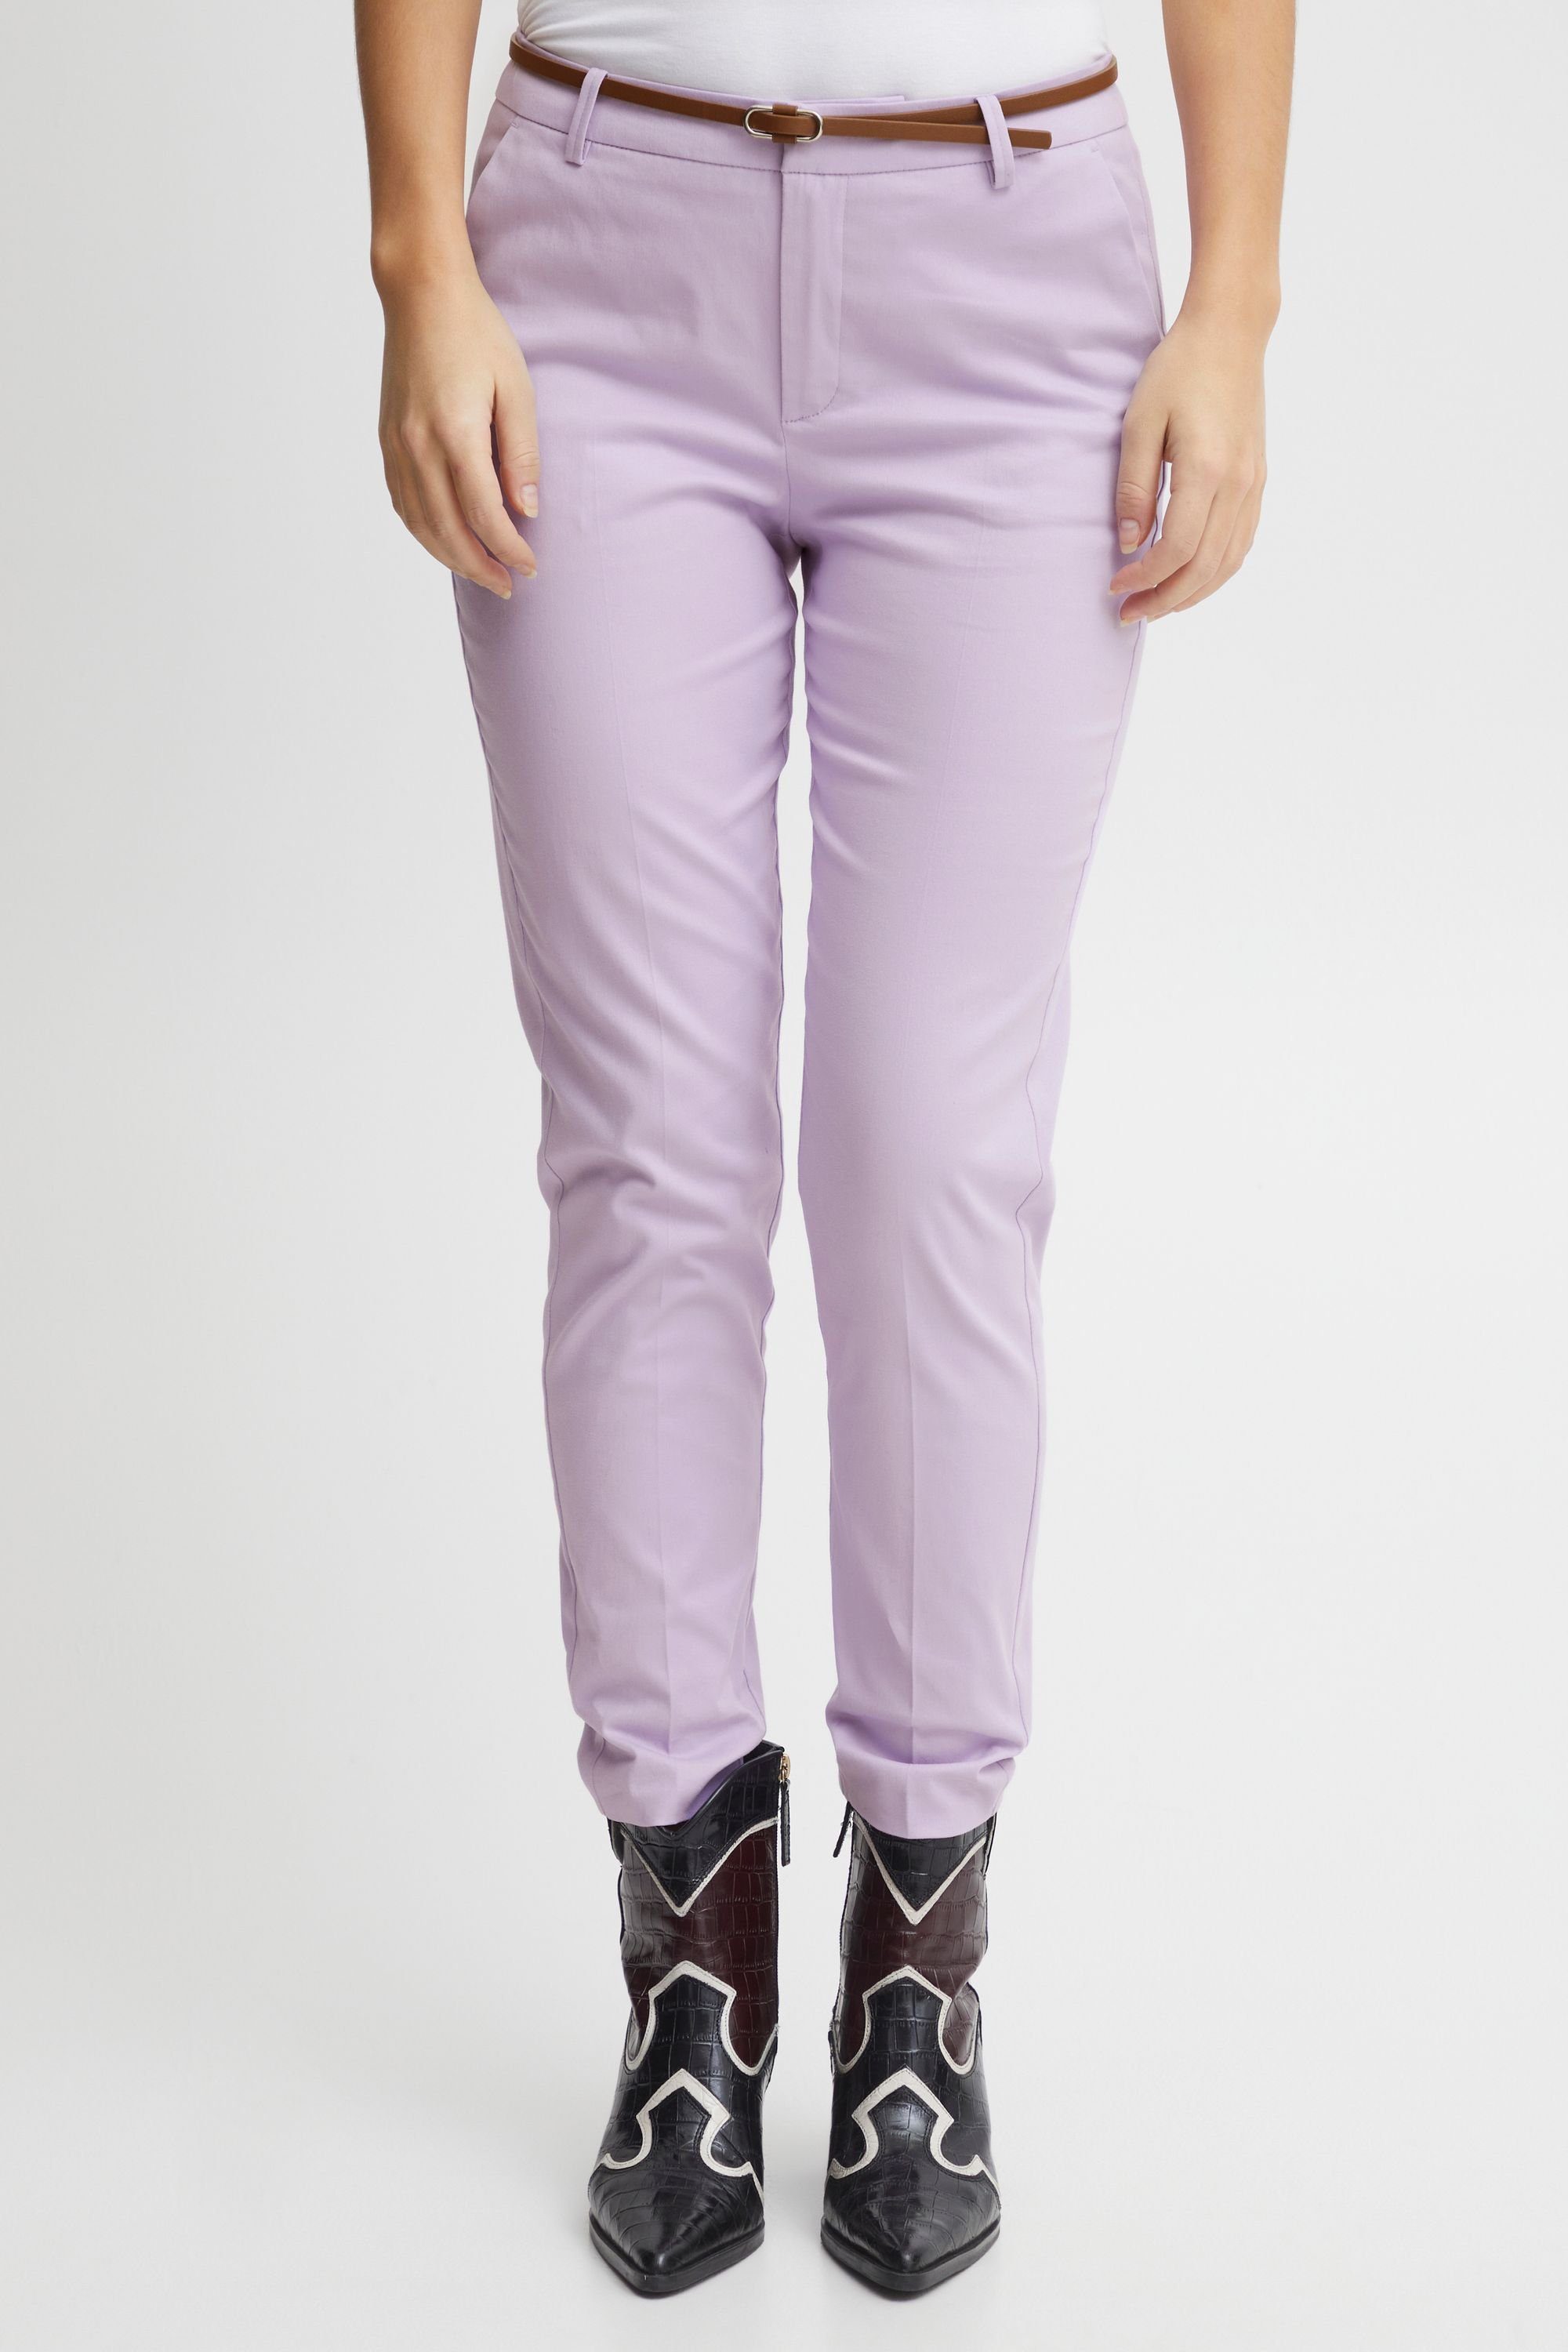 b.young Chinohose BYDays cigaret Rose (153716) - pants Purple 20803473 2